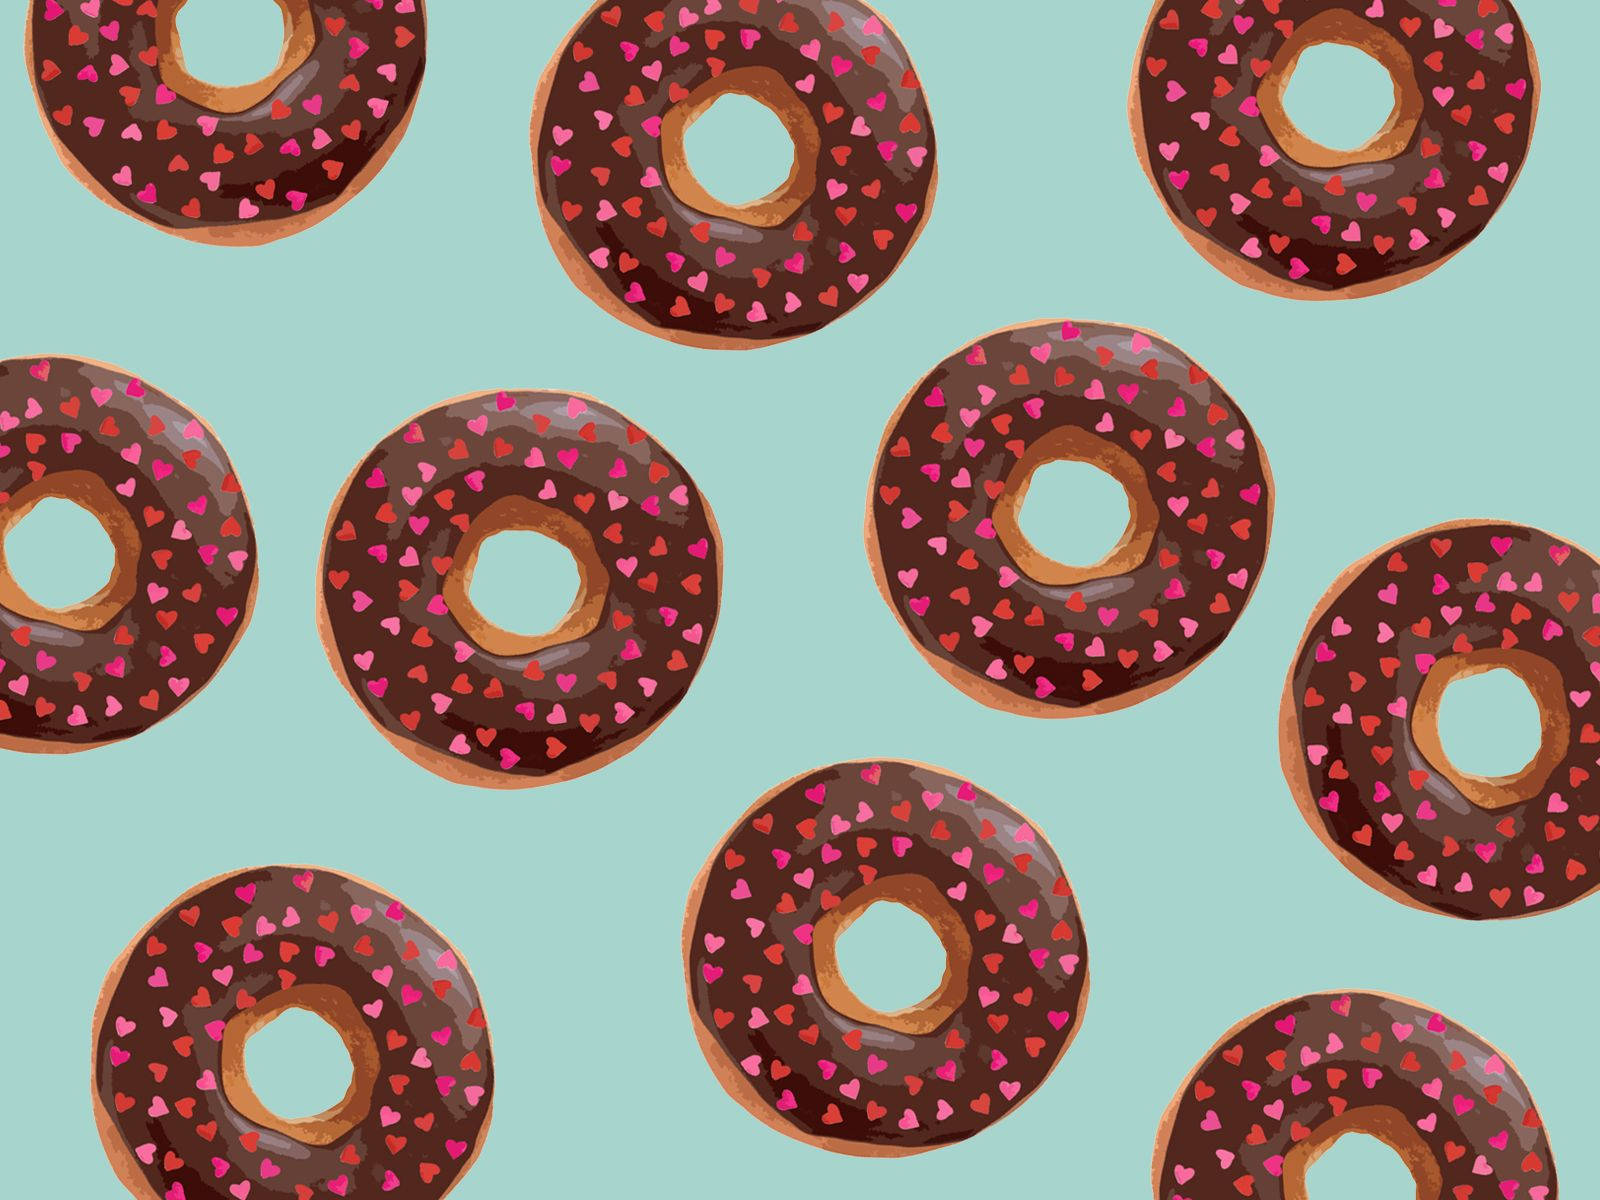 Show your loved ones how much you care, with these February-inspired donuts! Wallpaper